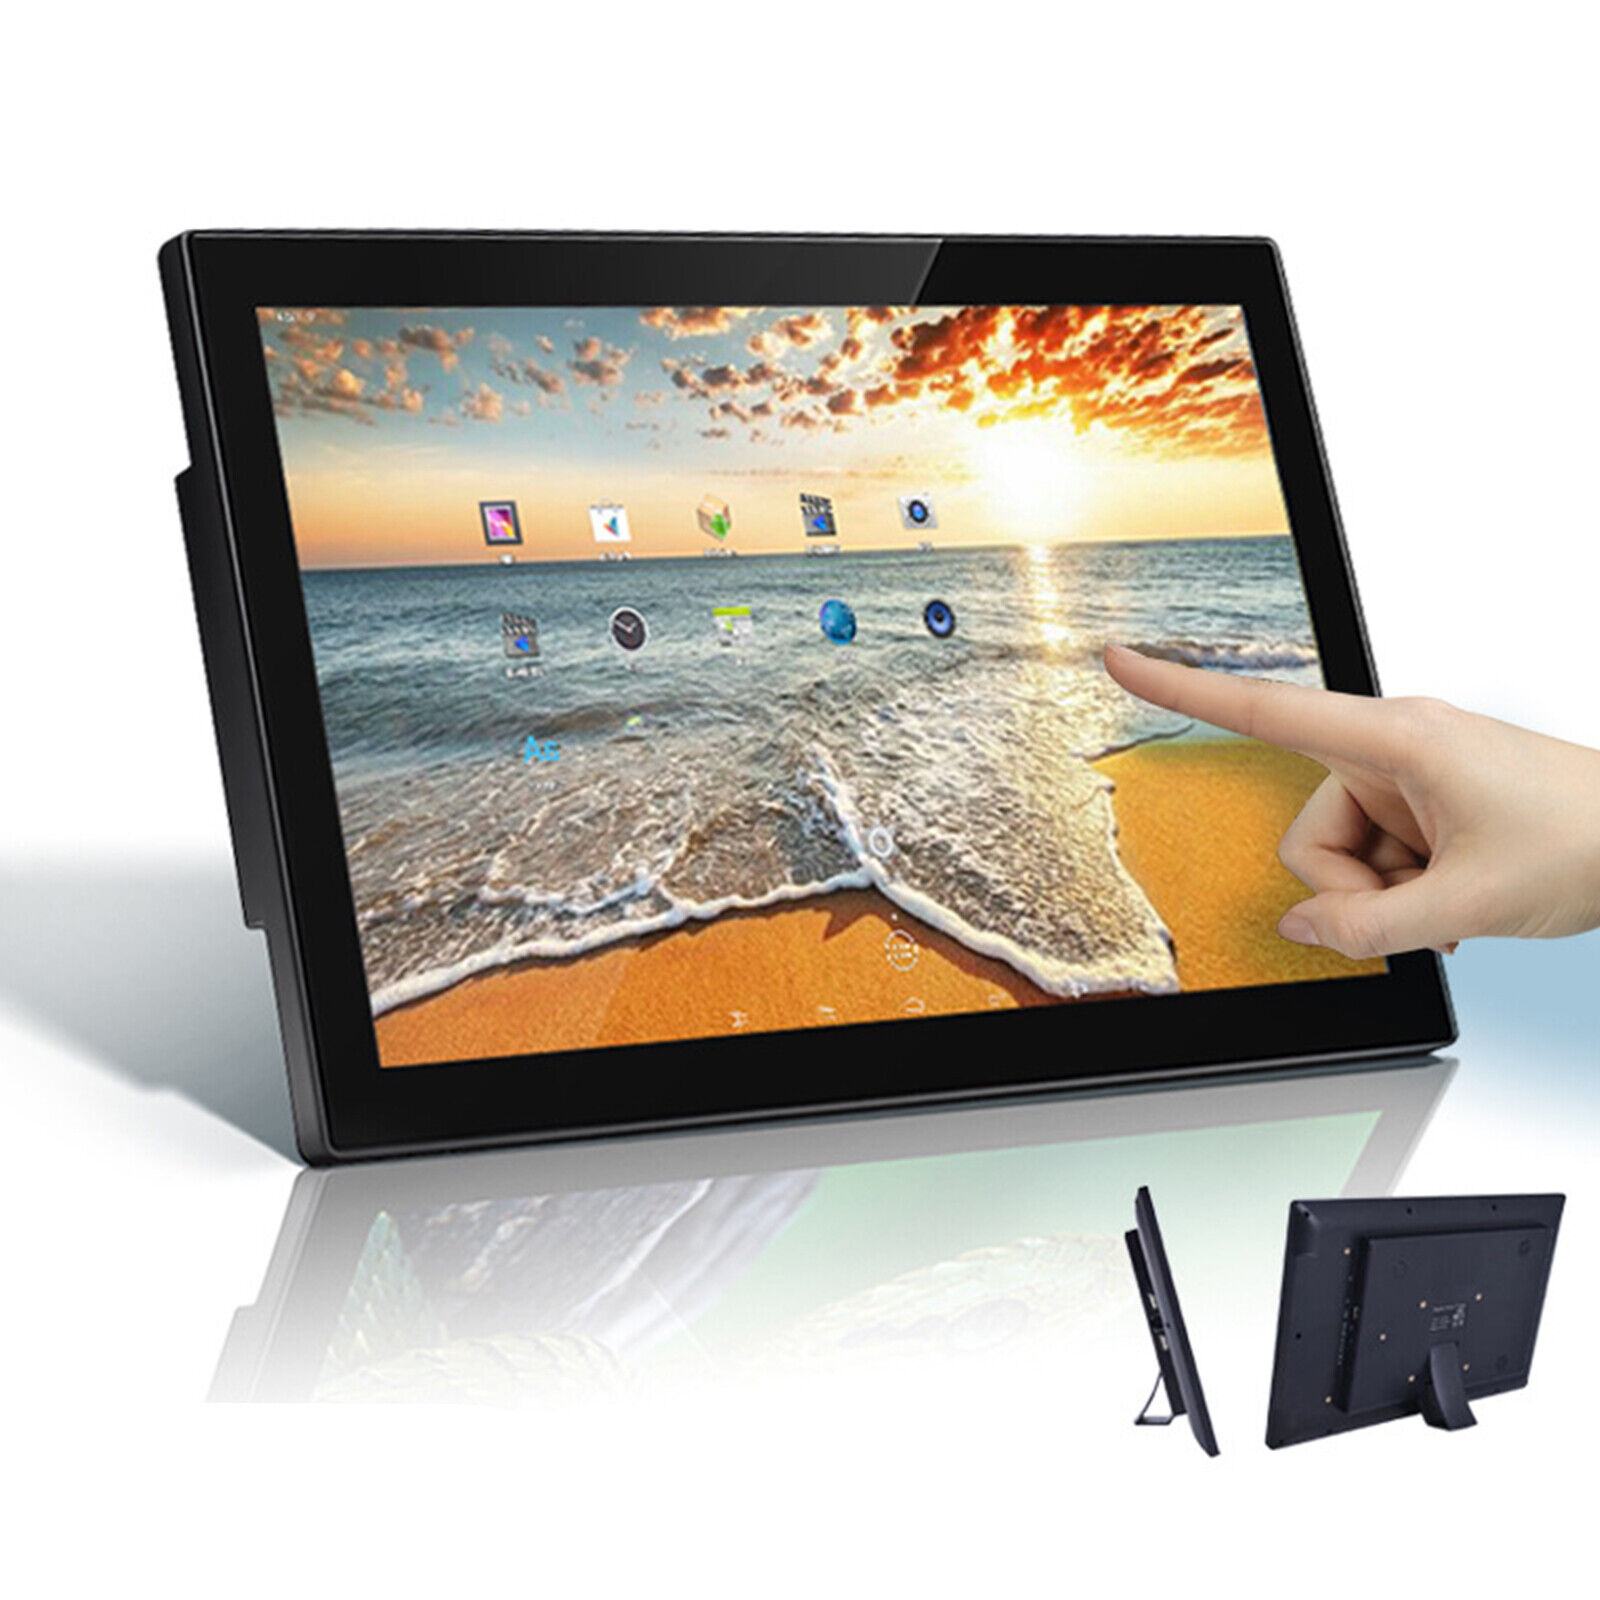 US STOCK 21.5 Inch LCD Touch Screen Android Waterproof Tablet PC Wall Mount WiFi